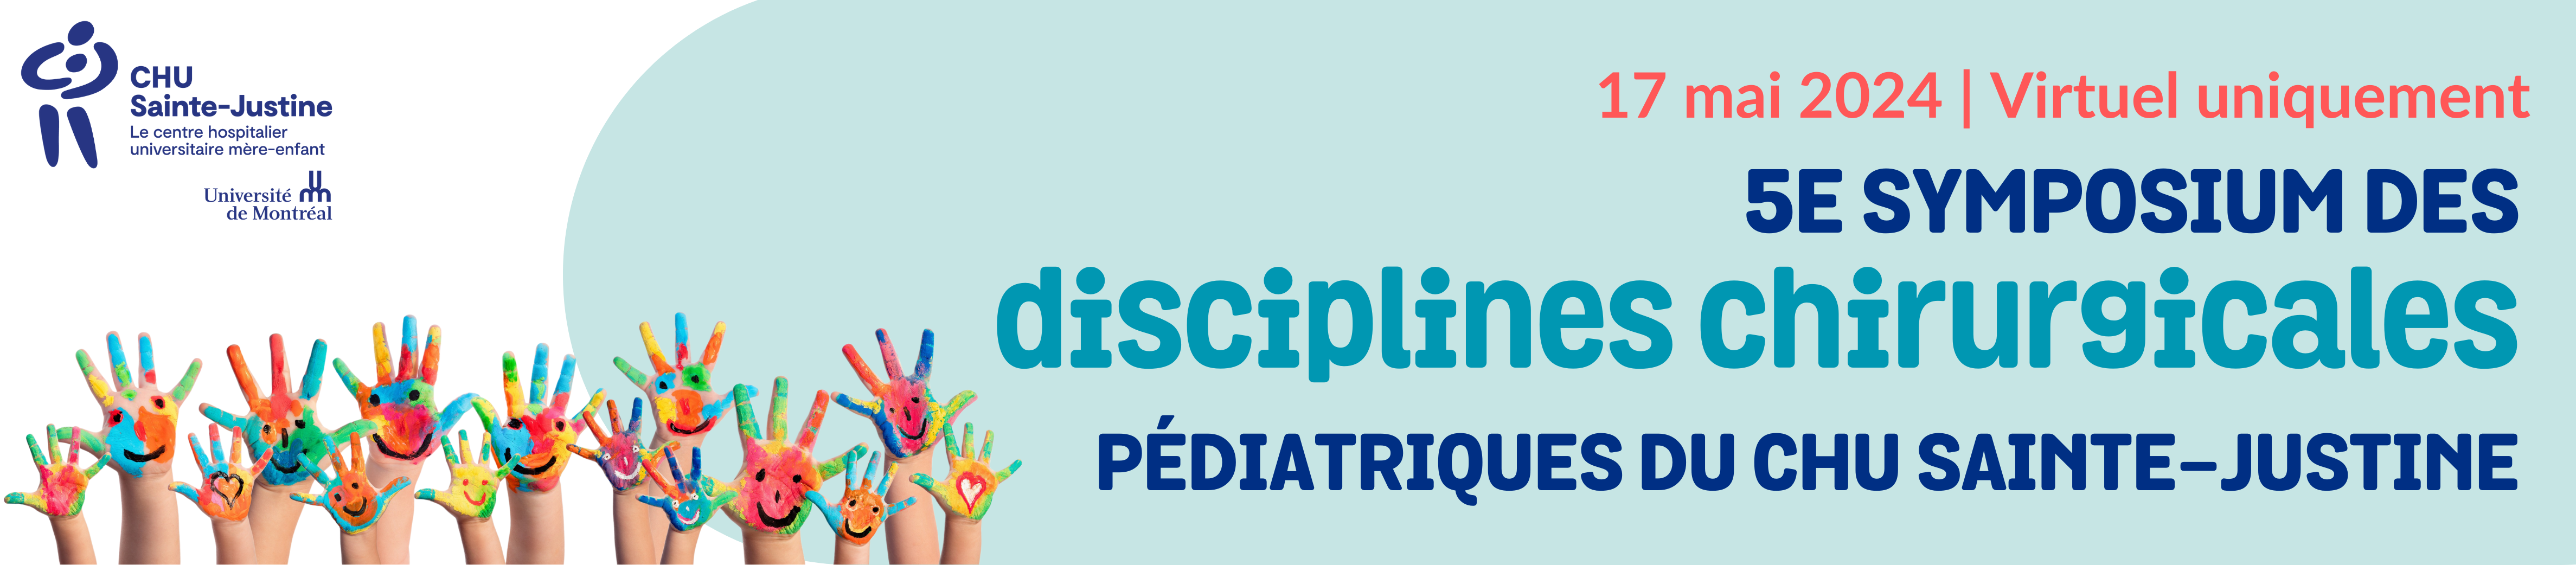 Disciplines-chirurgicales-2024.png